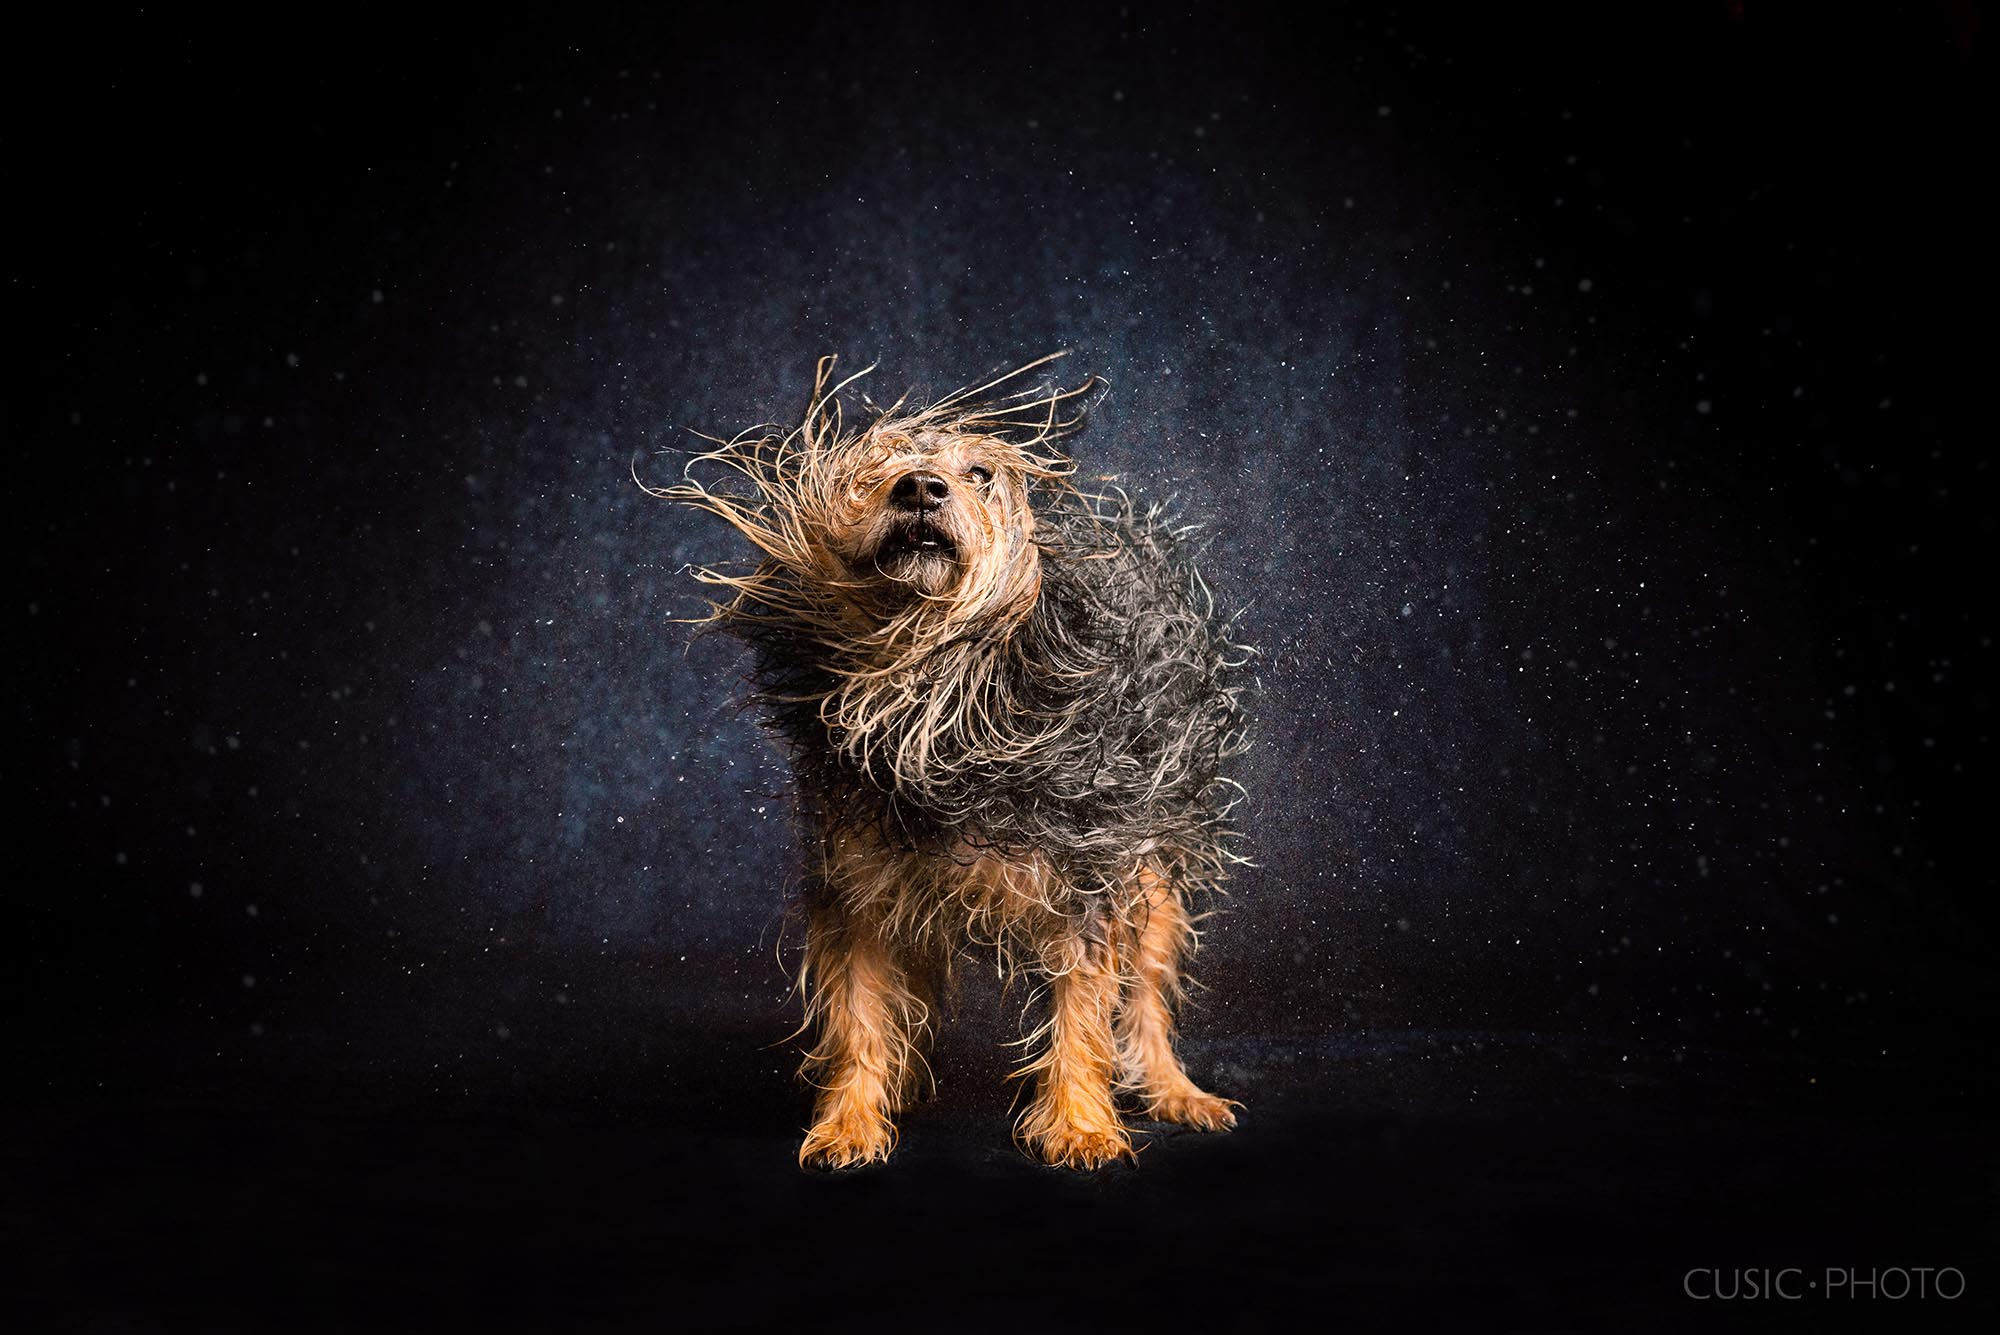 black and tan dog shaking off water in dog portrait by artist and dog photographer Candice C. Cusic